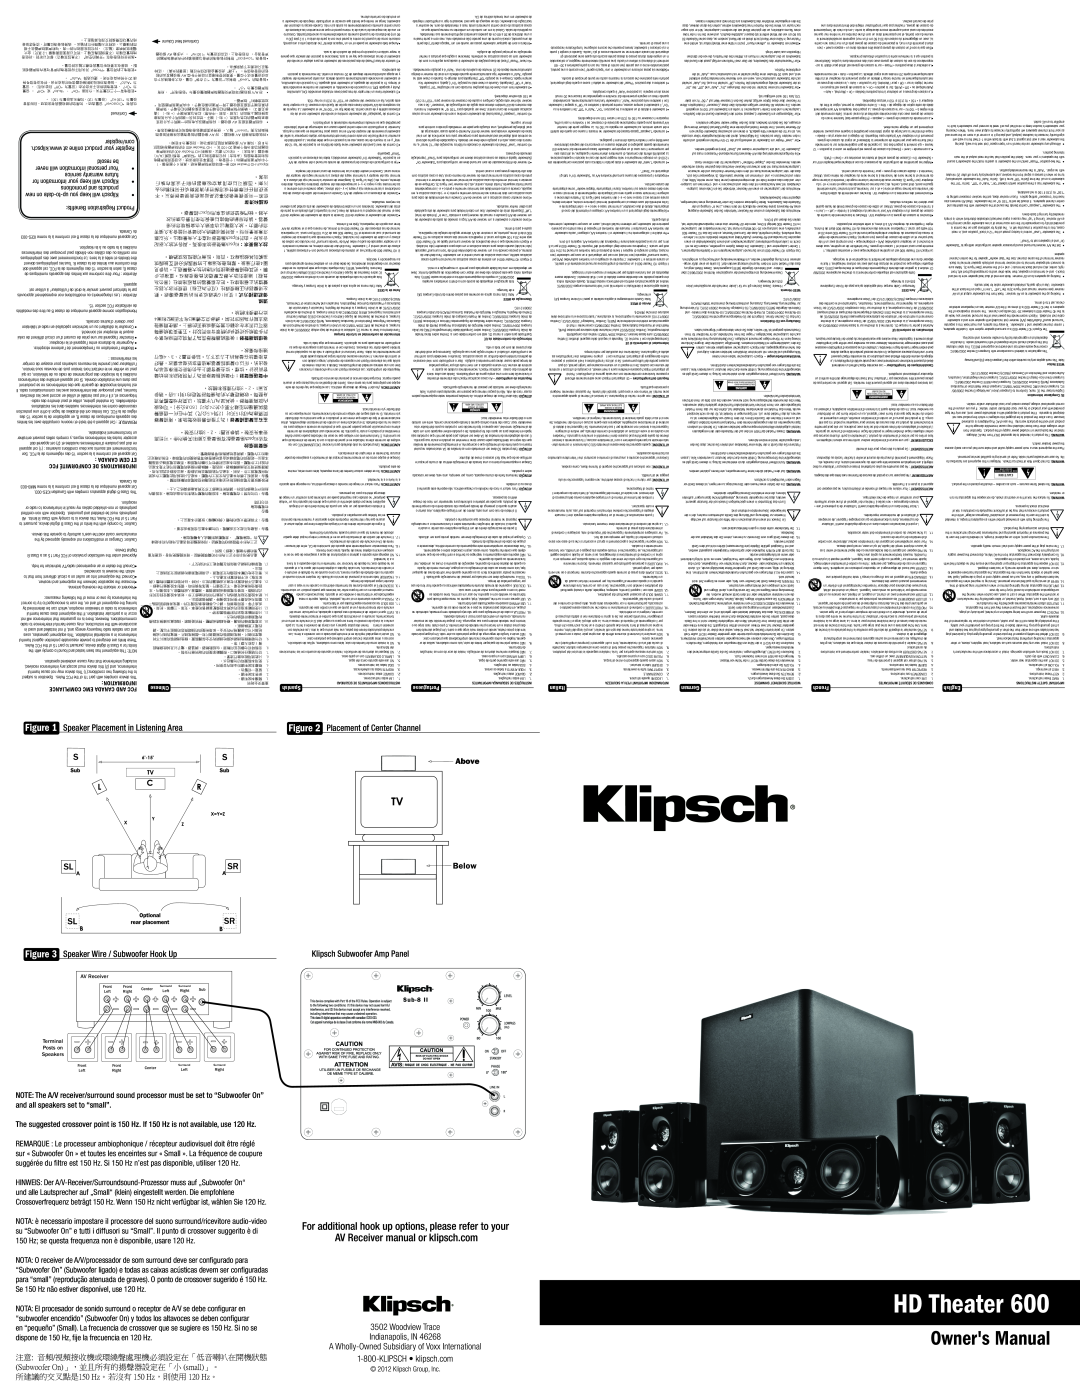 Klipsch HD THEATER 600 owner manual HD Theater, Placement of Center Channel, Speaker Wire / Subwoofer Hook Up 